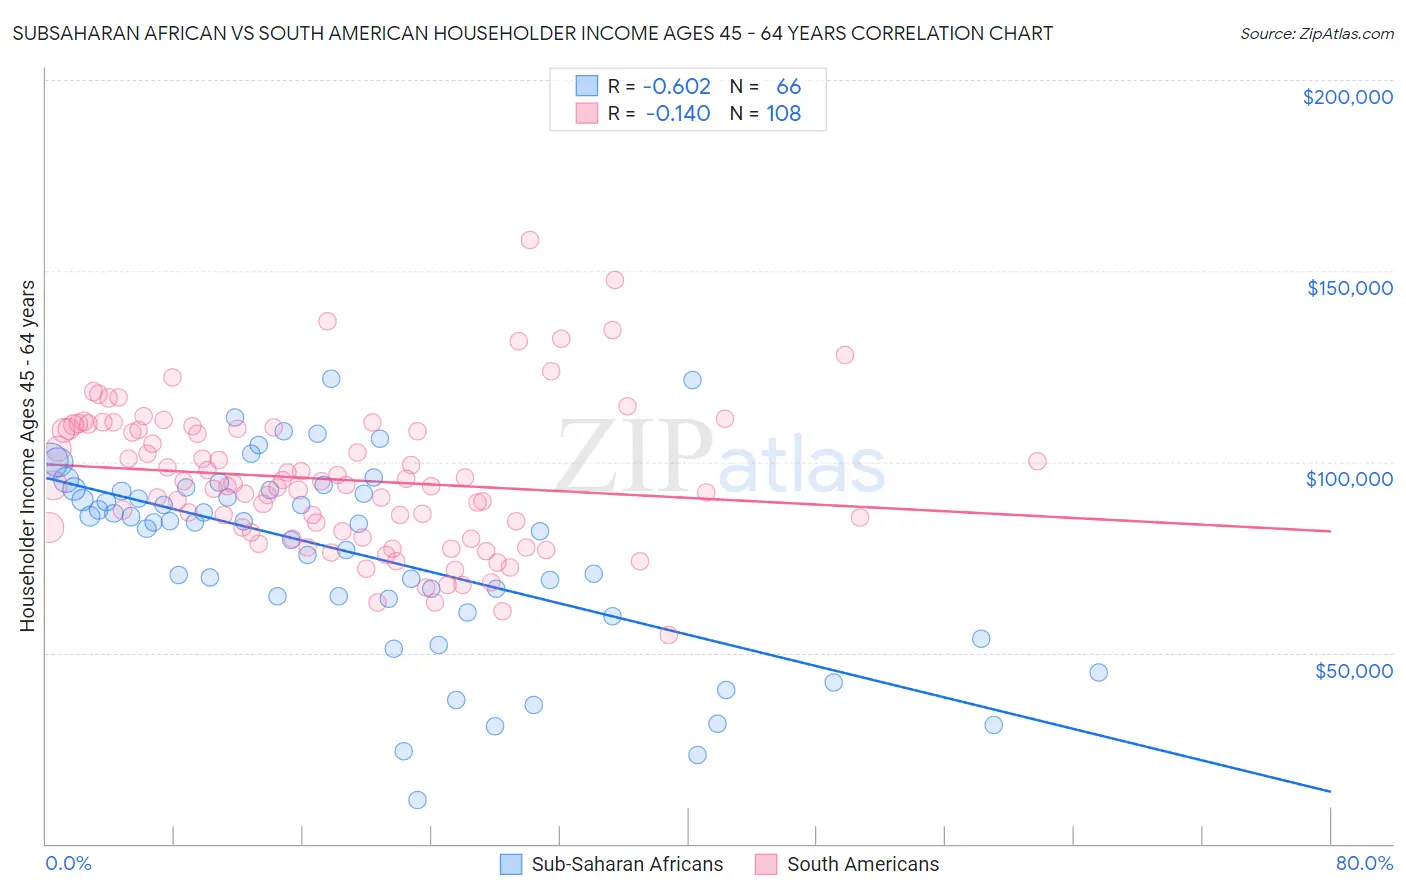 Subsaharan African vs South American Householder Income Ages 45 - 64 years